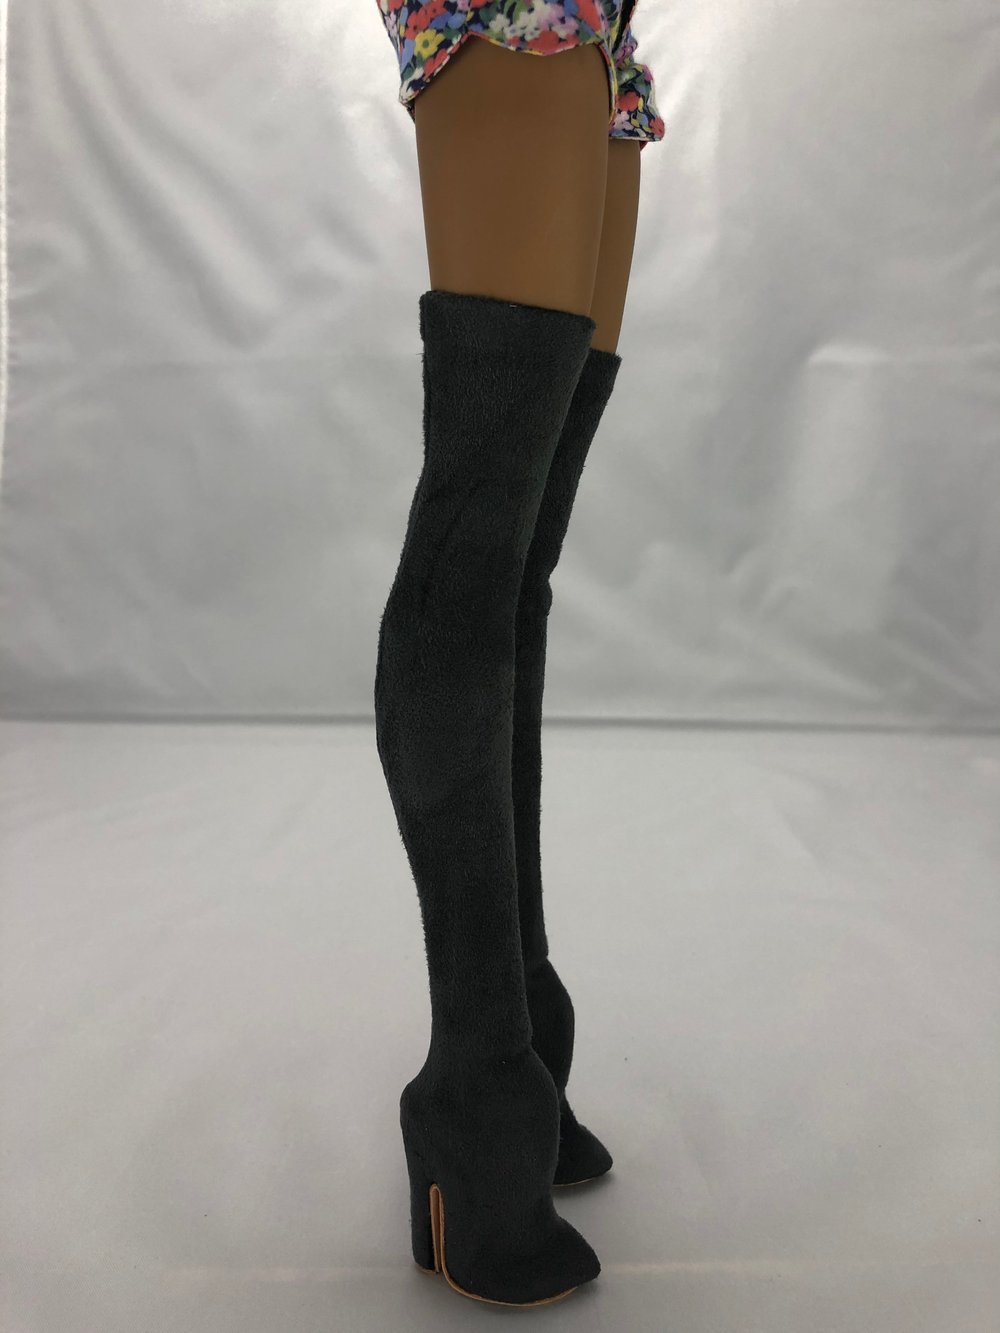 Gray Suede Thigh High Boots: Pidgin Doll  P1